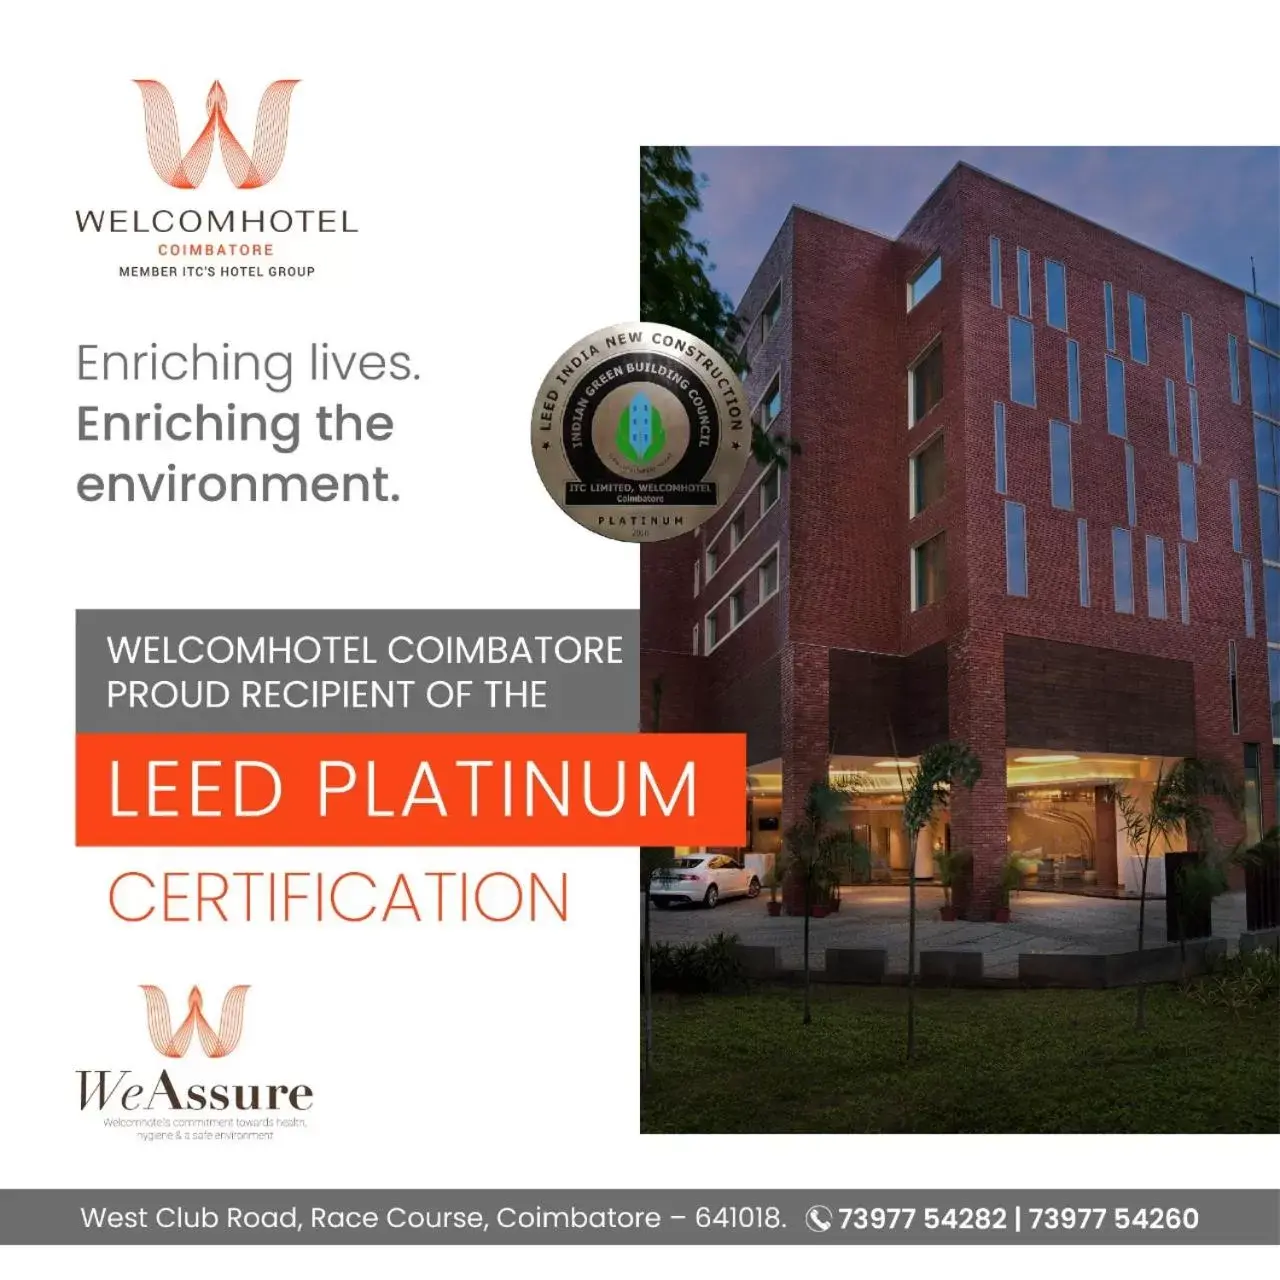 Certificate/Award in Welcomhotel by ITC Hotels, RaceCourse, Coimbatore